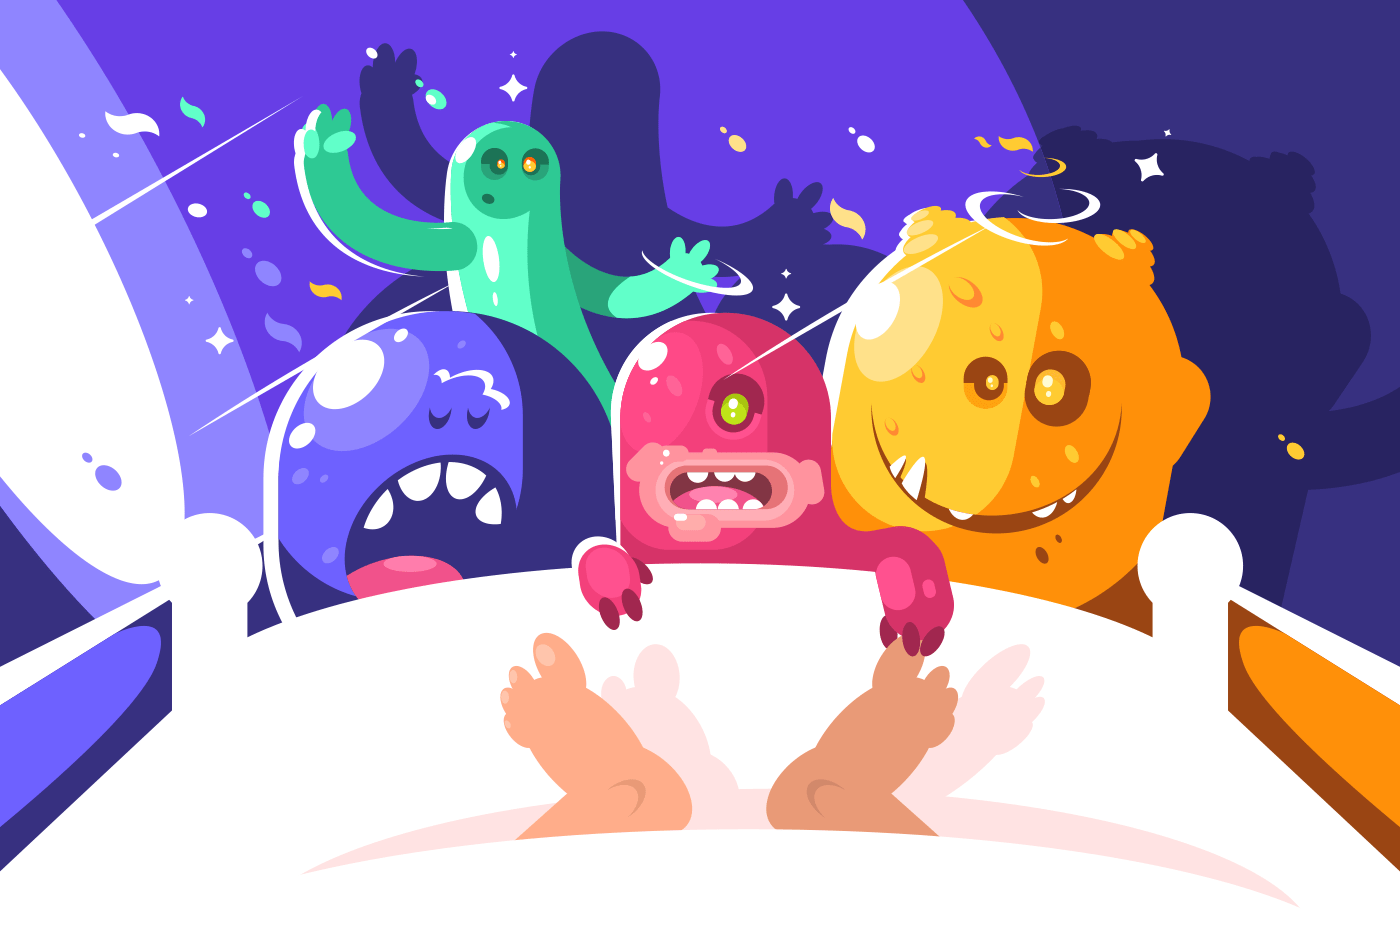 Night cute monsters bother sleeping in bed. Colored characters, vector illustration